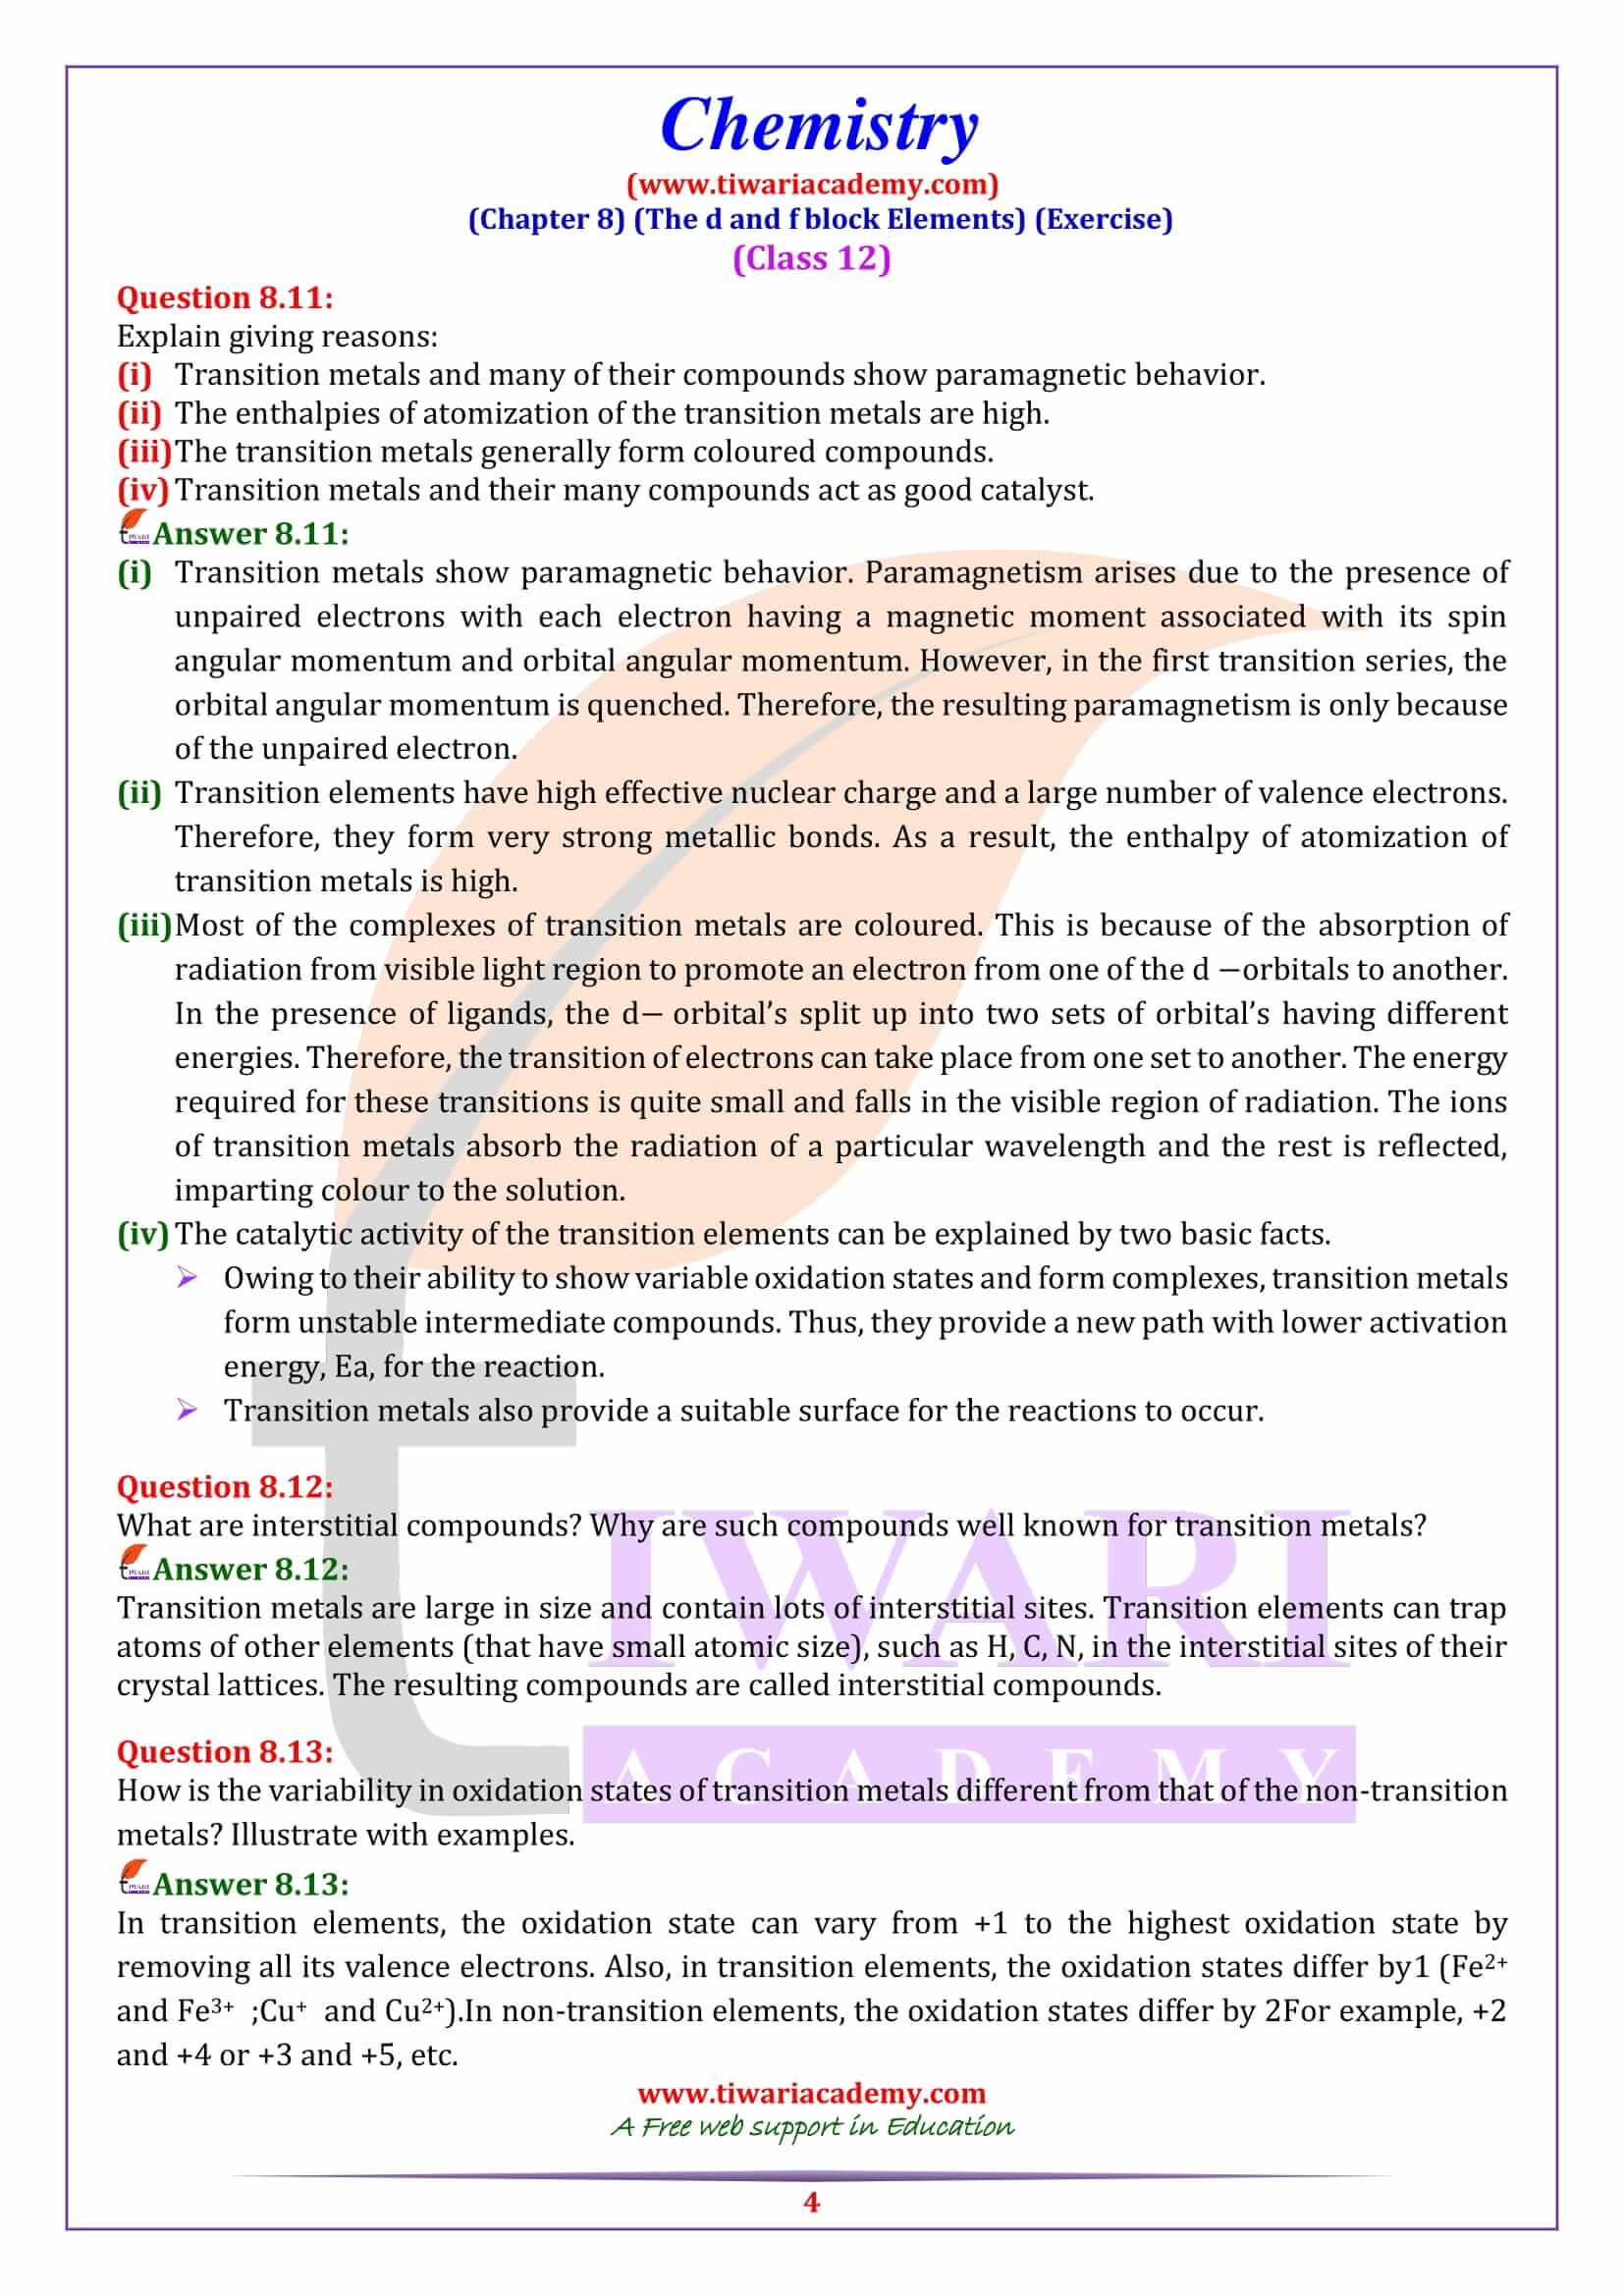 Class 12 Chemistry Chapter 8